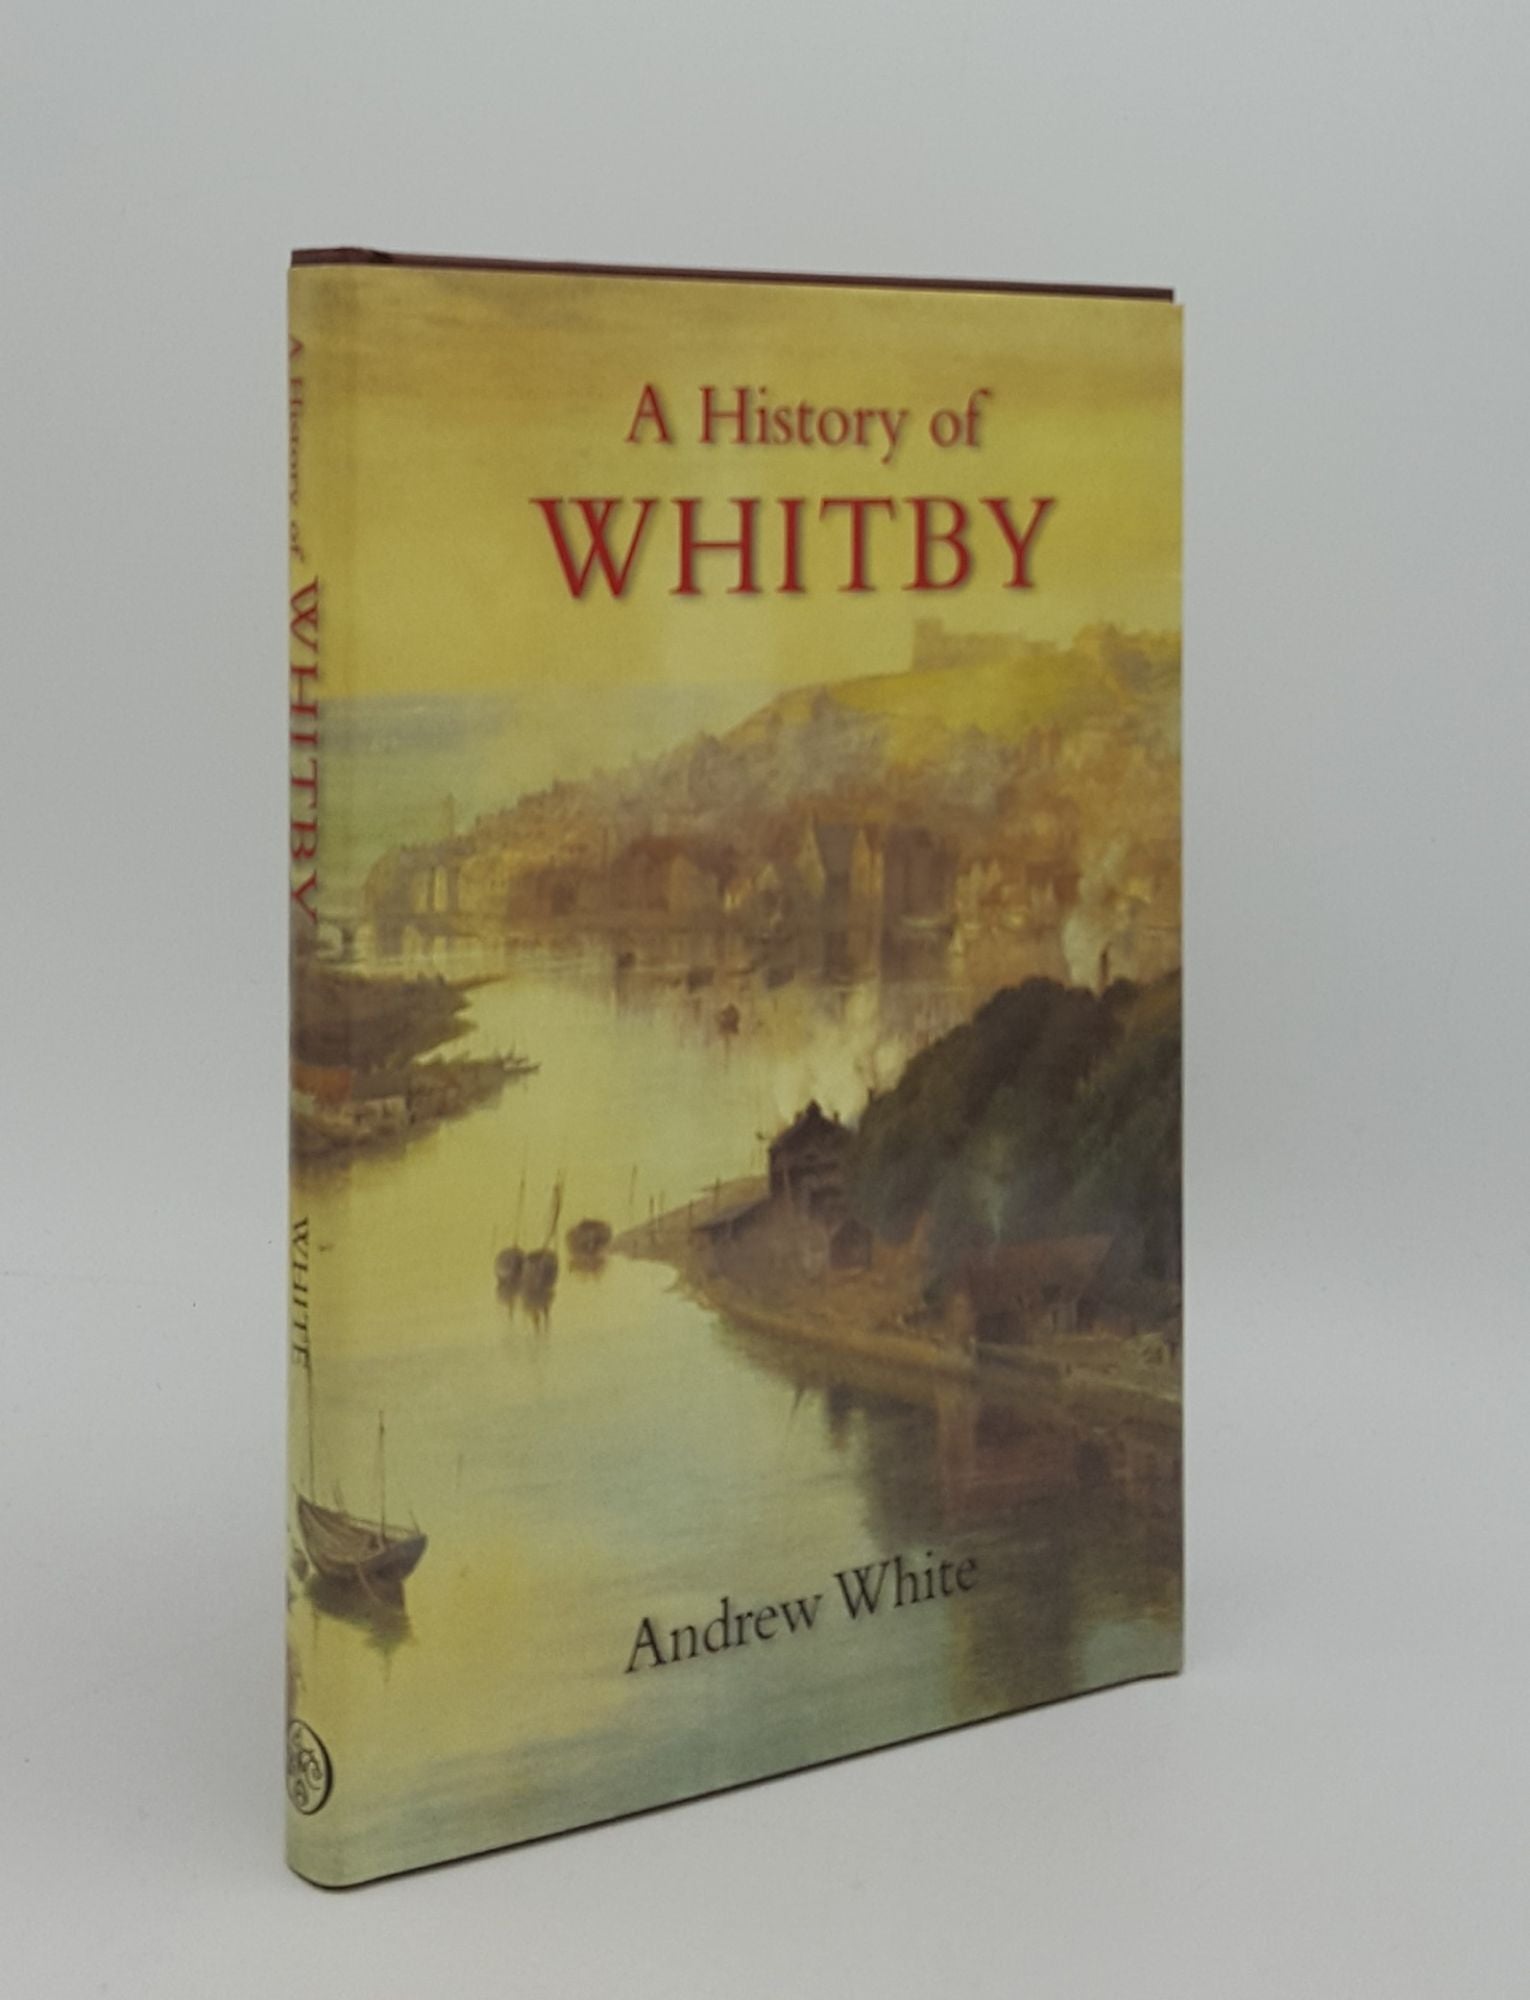 WHITE Andrew - A History of Whitby